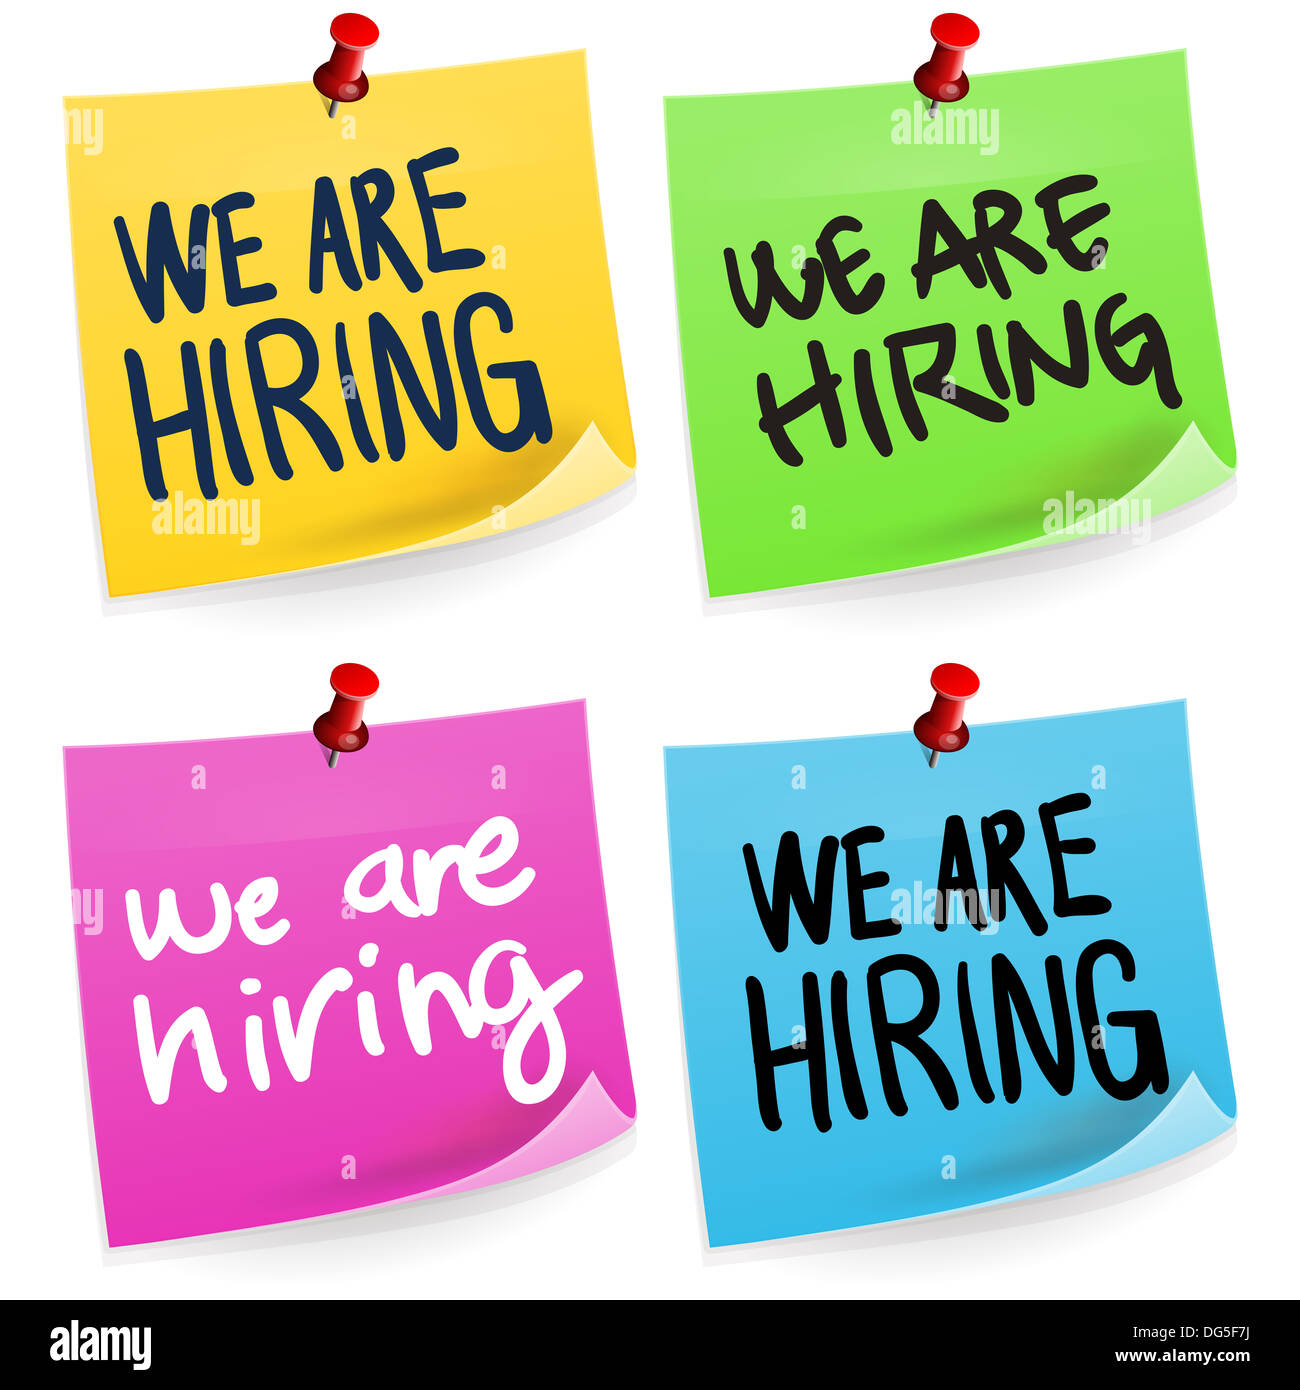 We Are Hiring Sticky Note Stock Photo